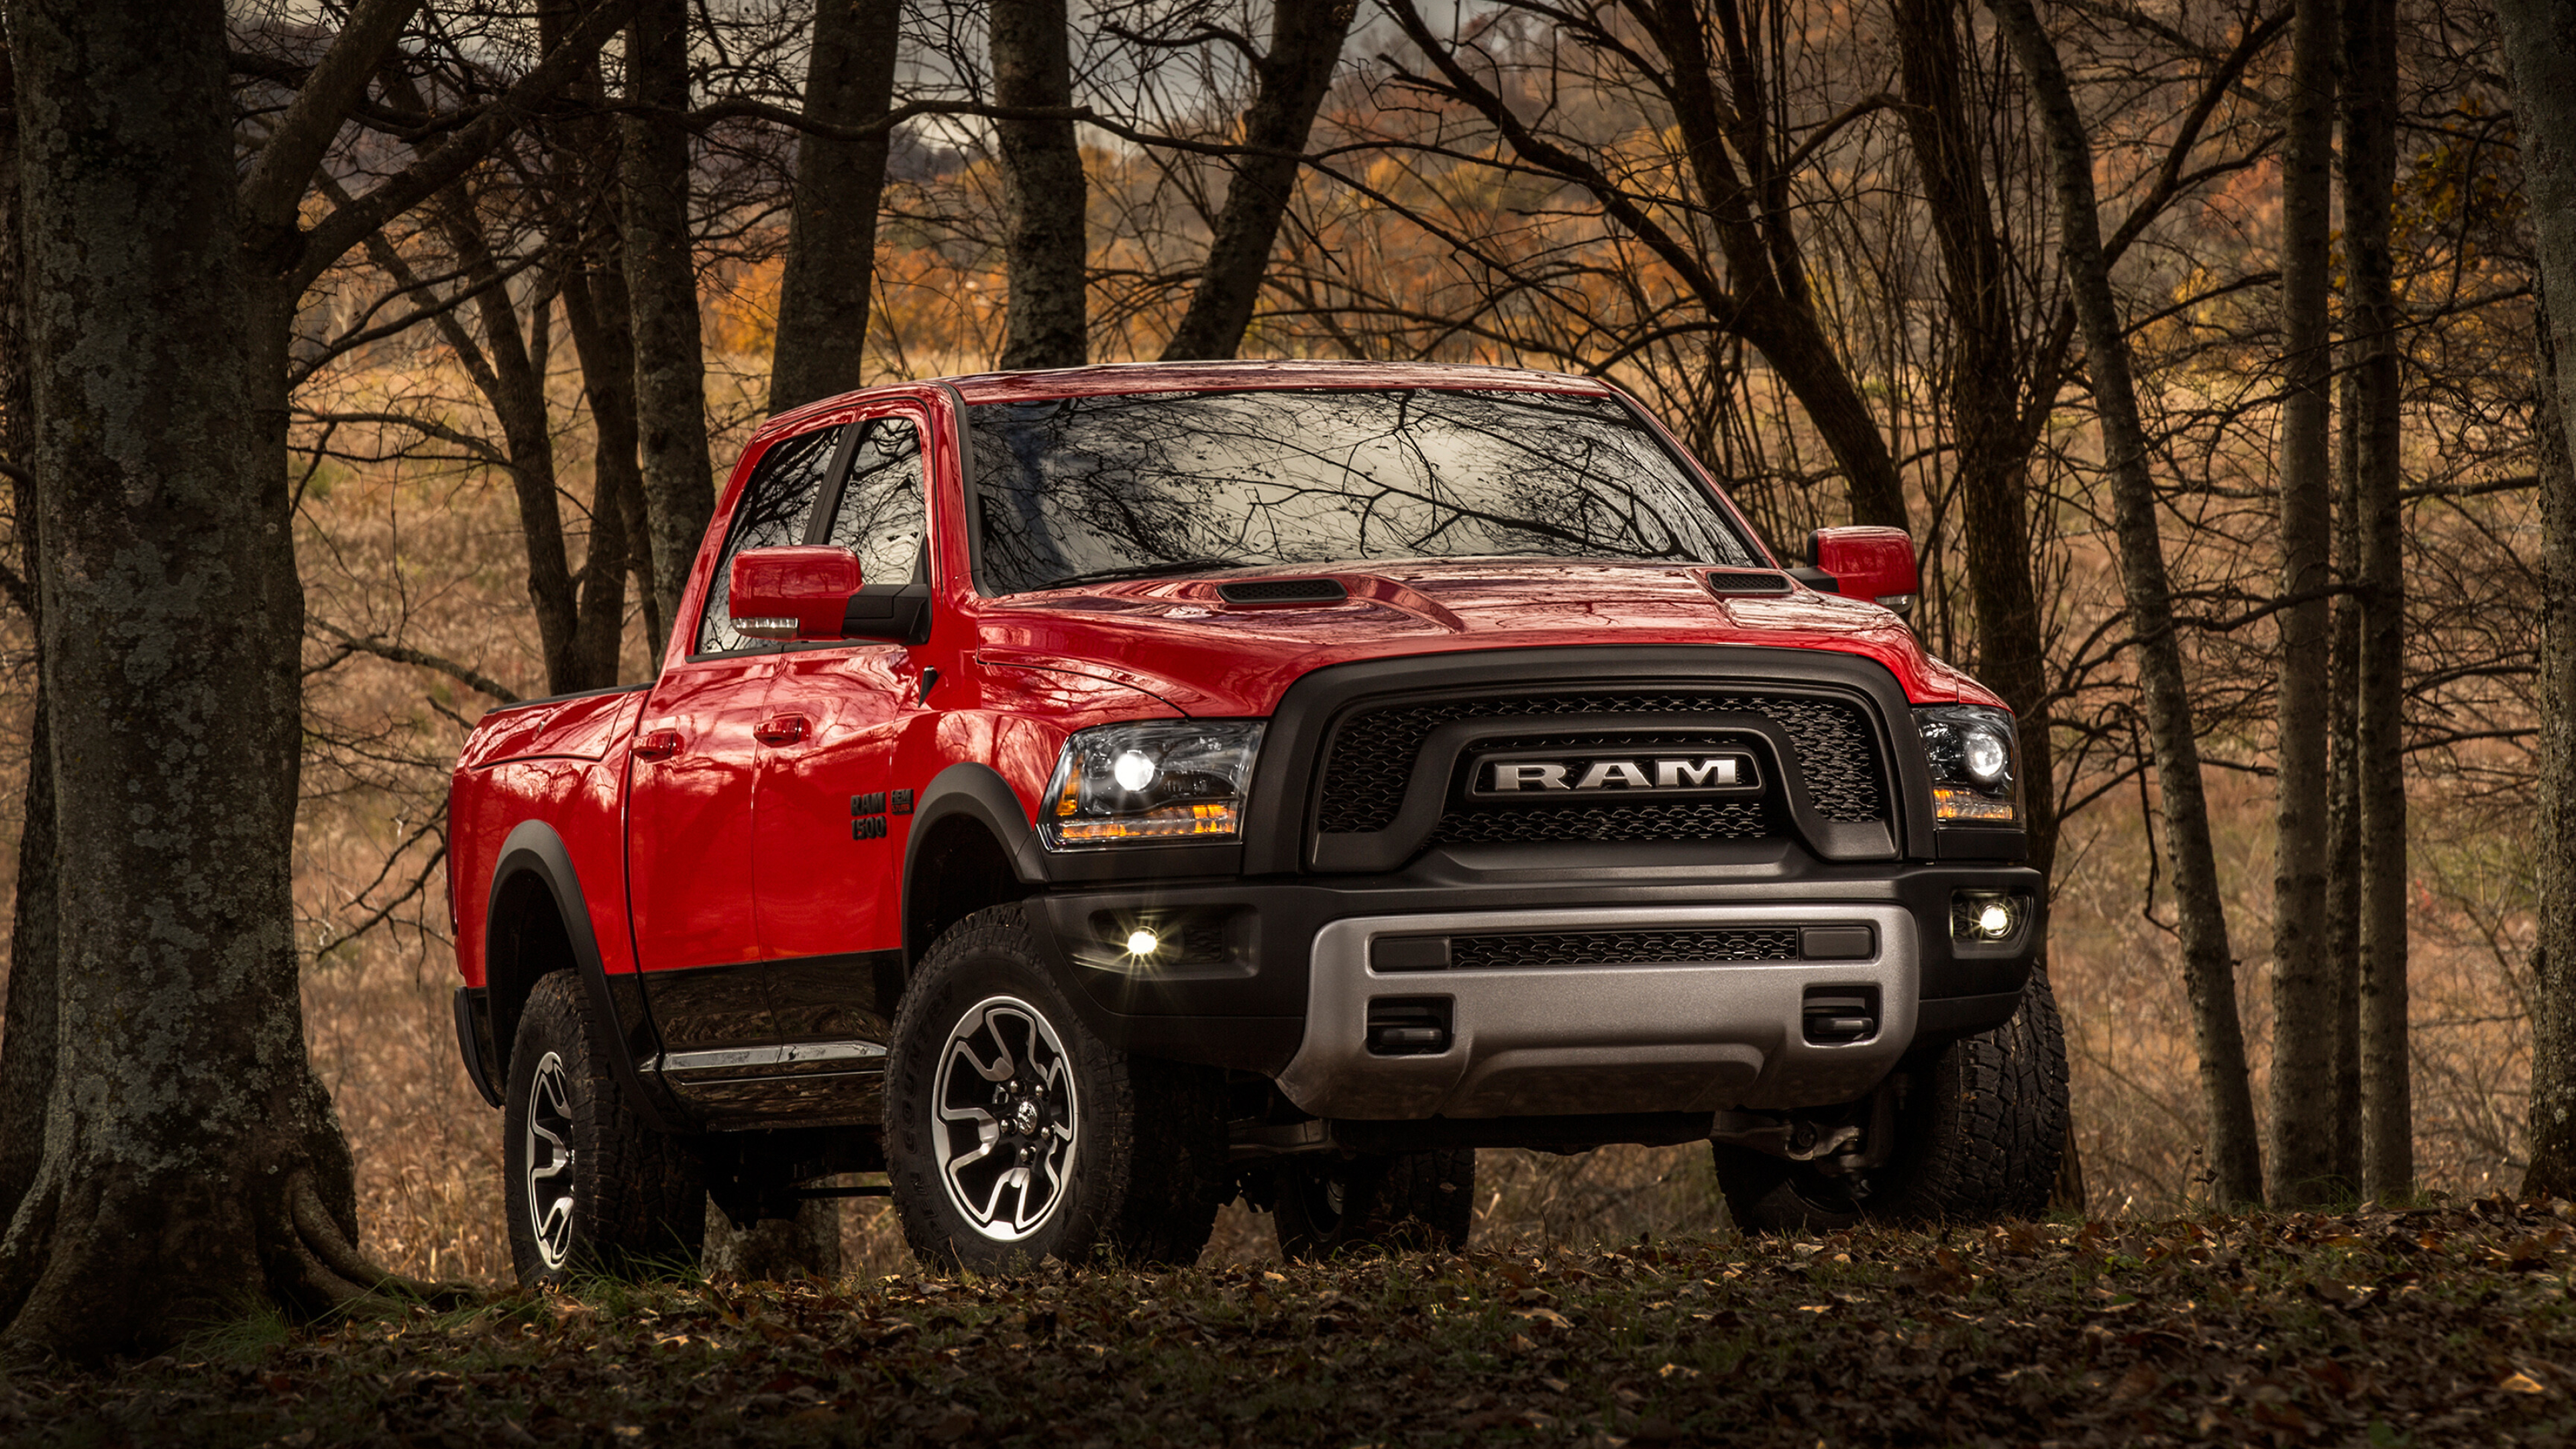 Ram Pickup: 1500 model, Cars, Previously, was part of the Dodge line of light trucks. 3840x2160 4K Wallpaper.